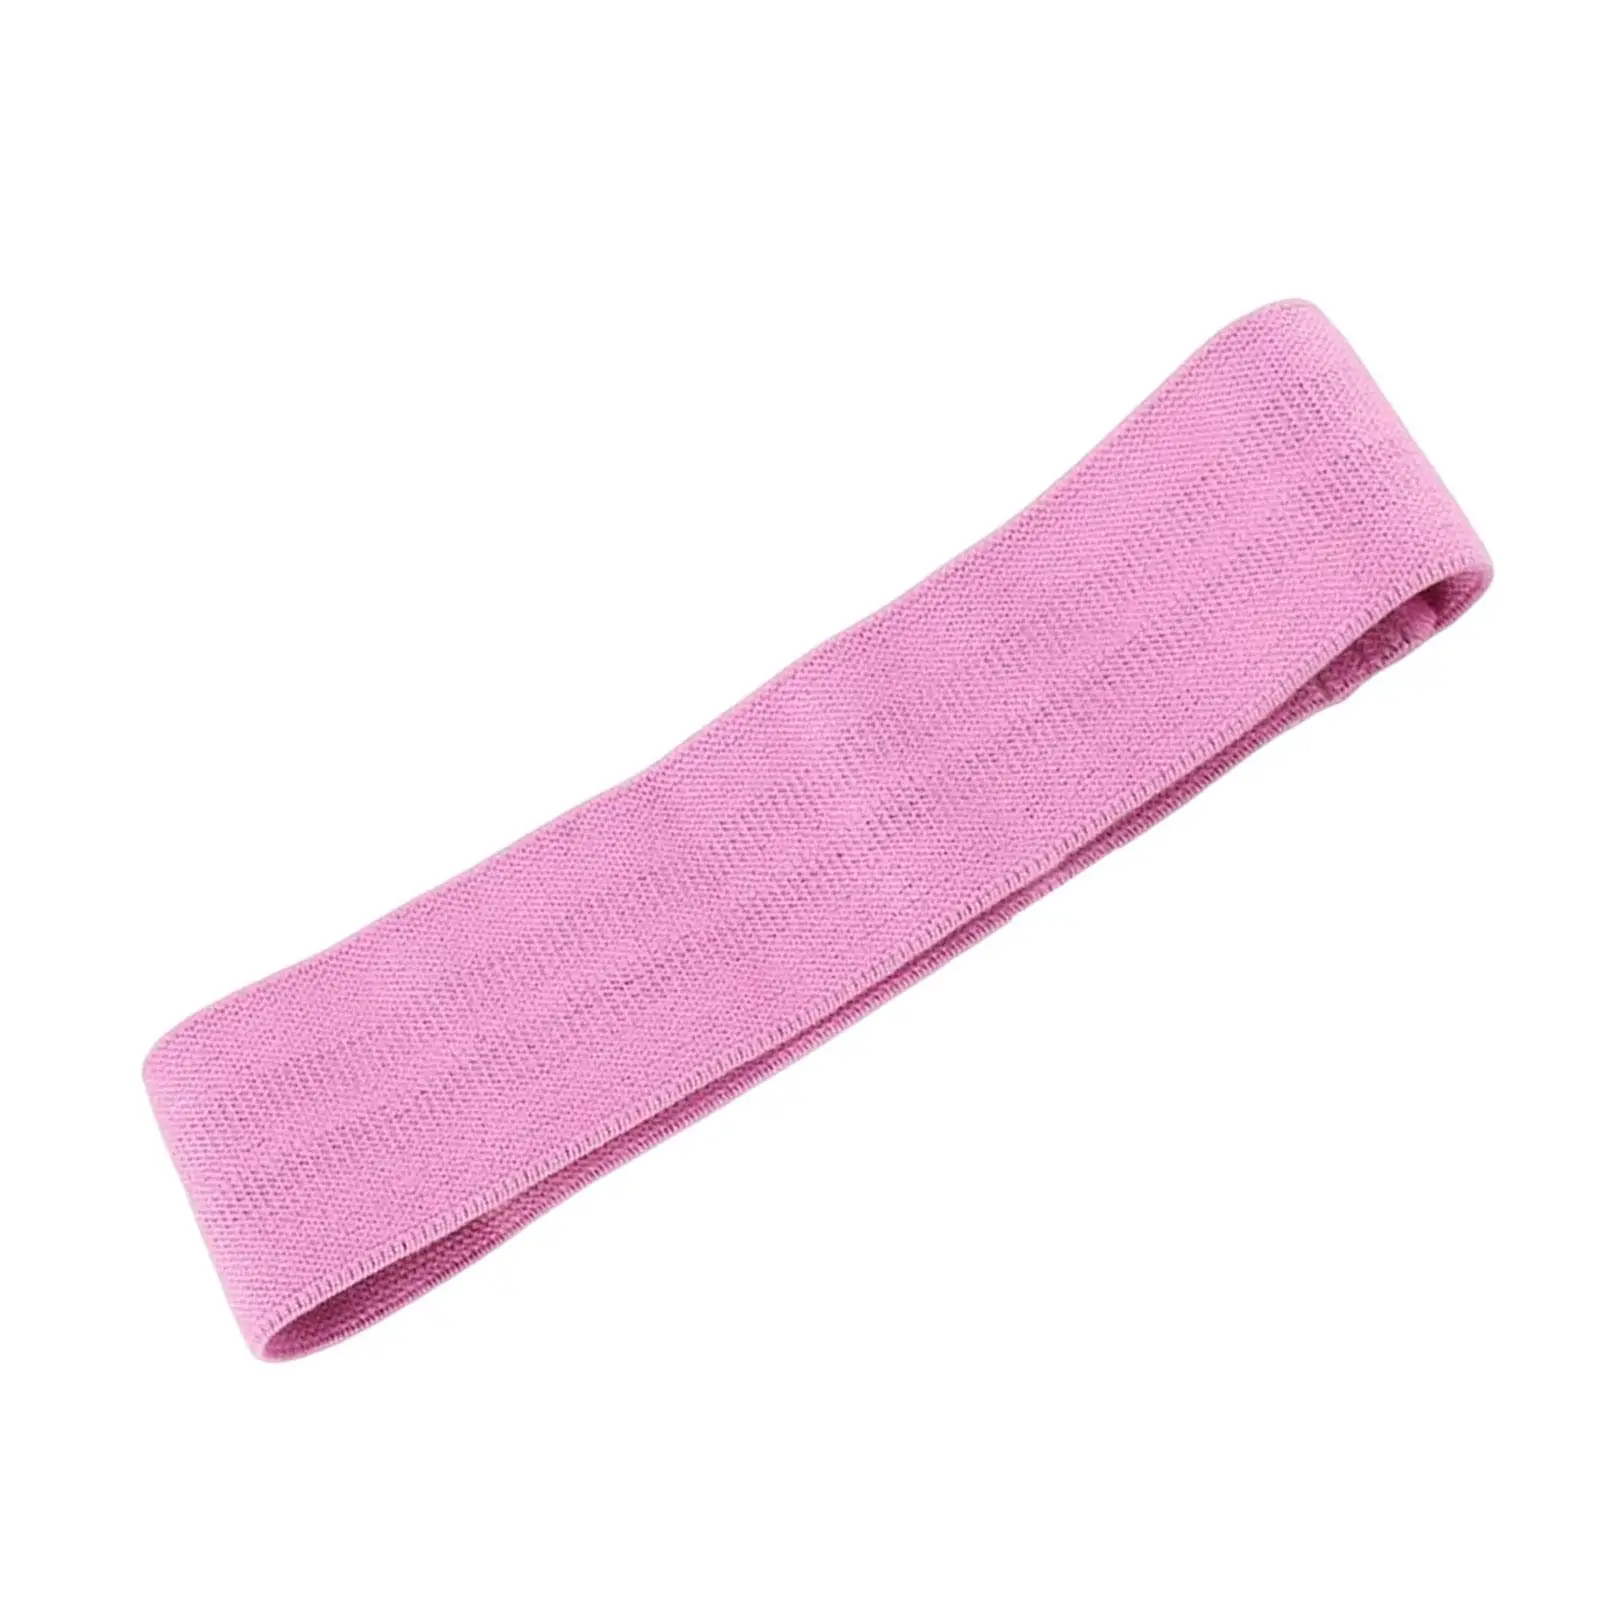 Resistance Band Non Slip Comfortable Booty Band Exercise Bands Resistance Loop Band for Thigh Pilates Yoga Training Working Out